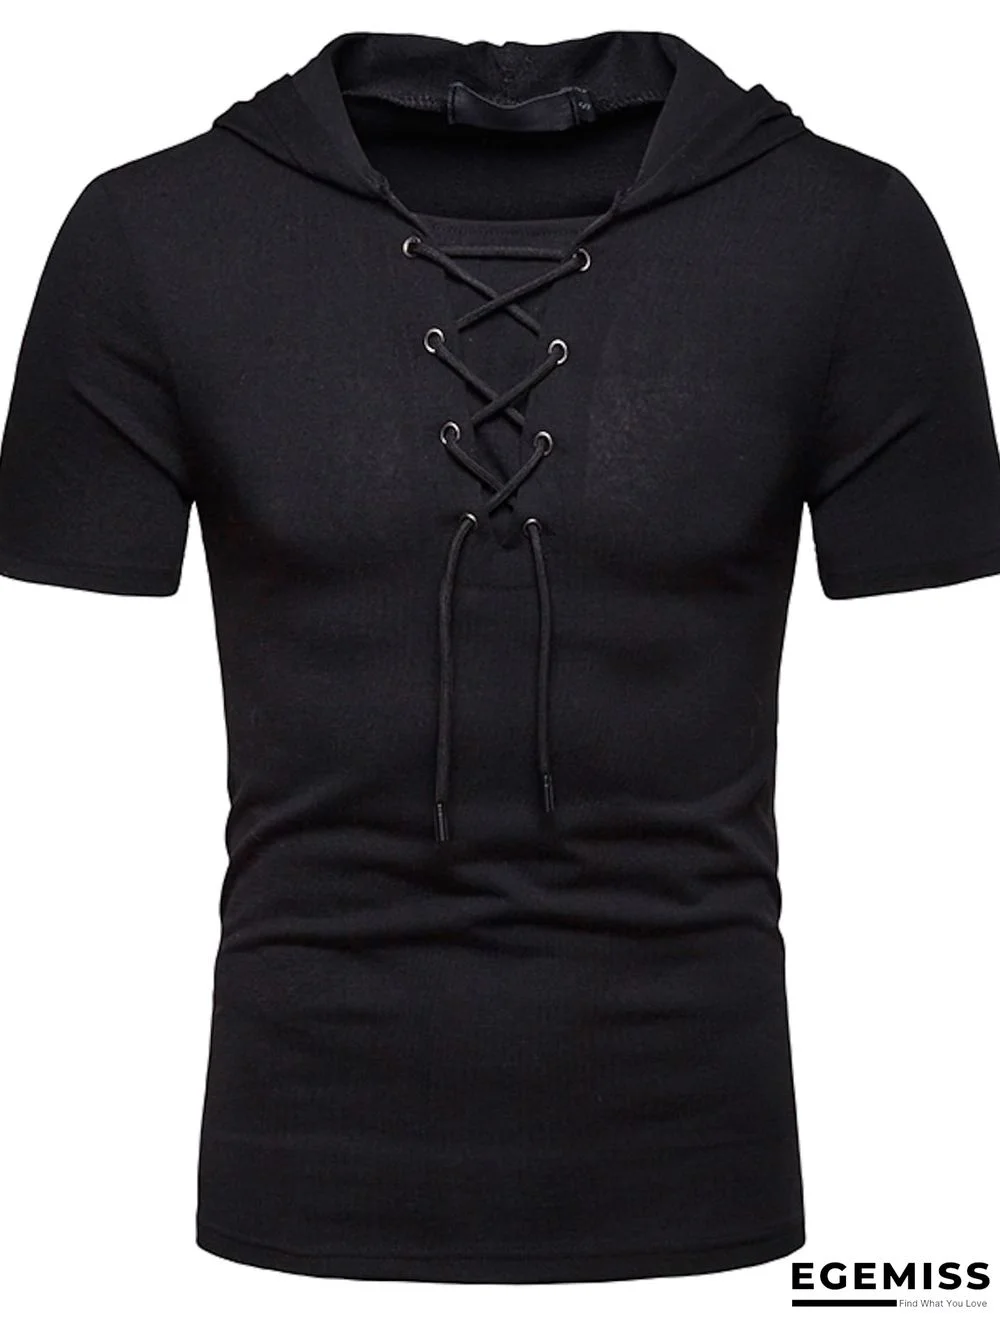 Men's T shirt Shirt Solid Colored Lace up Short Sleeve Daily Tops Basic Shirt Collar | EGEMISS